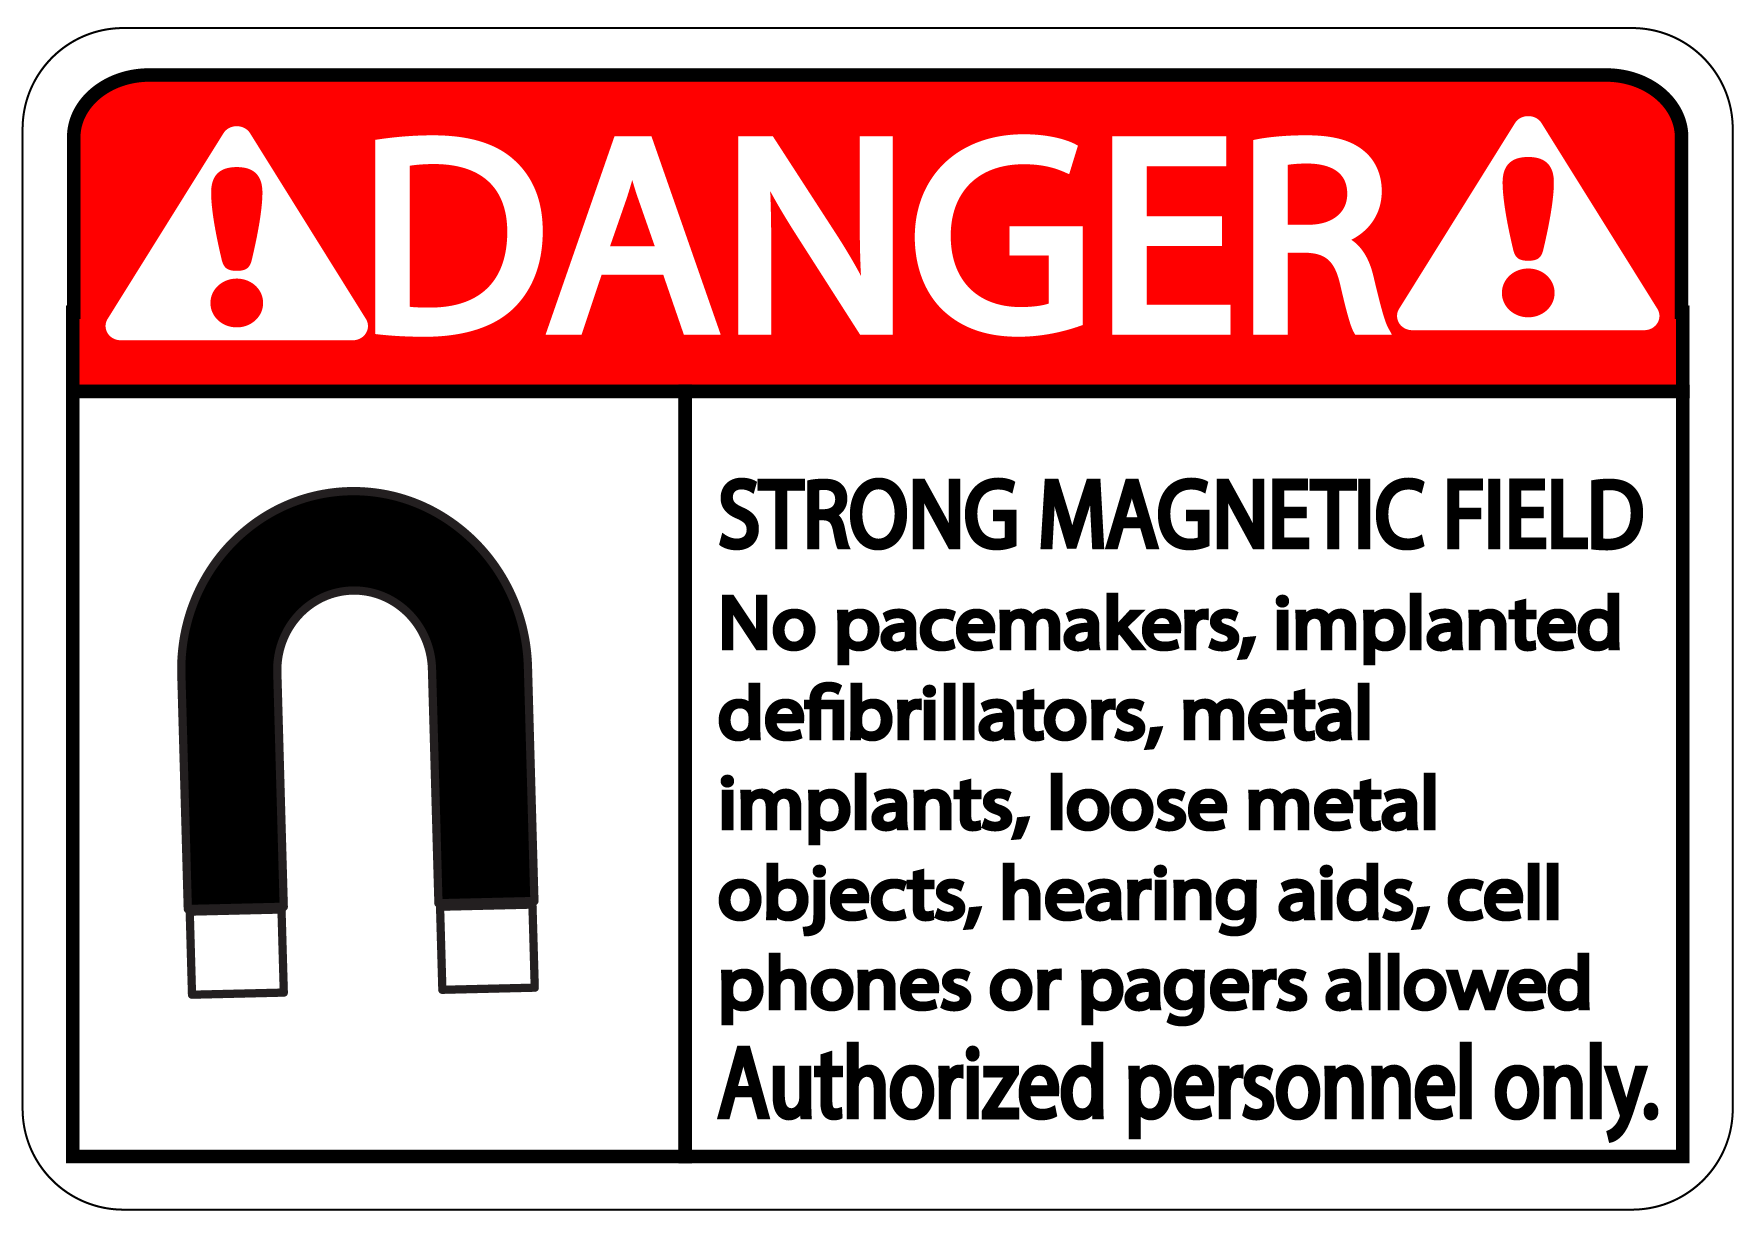 Danger "Strong Magnetic Field, Authorized Personnel Only" Durable Matte Laminated Vinyl Floor Sign- Various Sizes Available